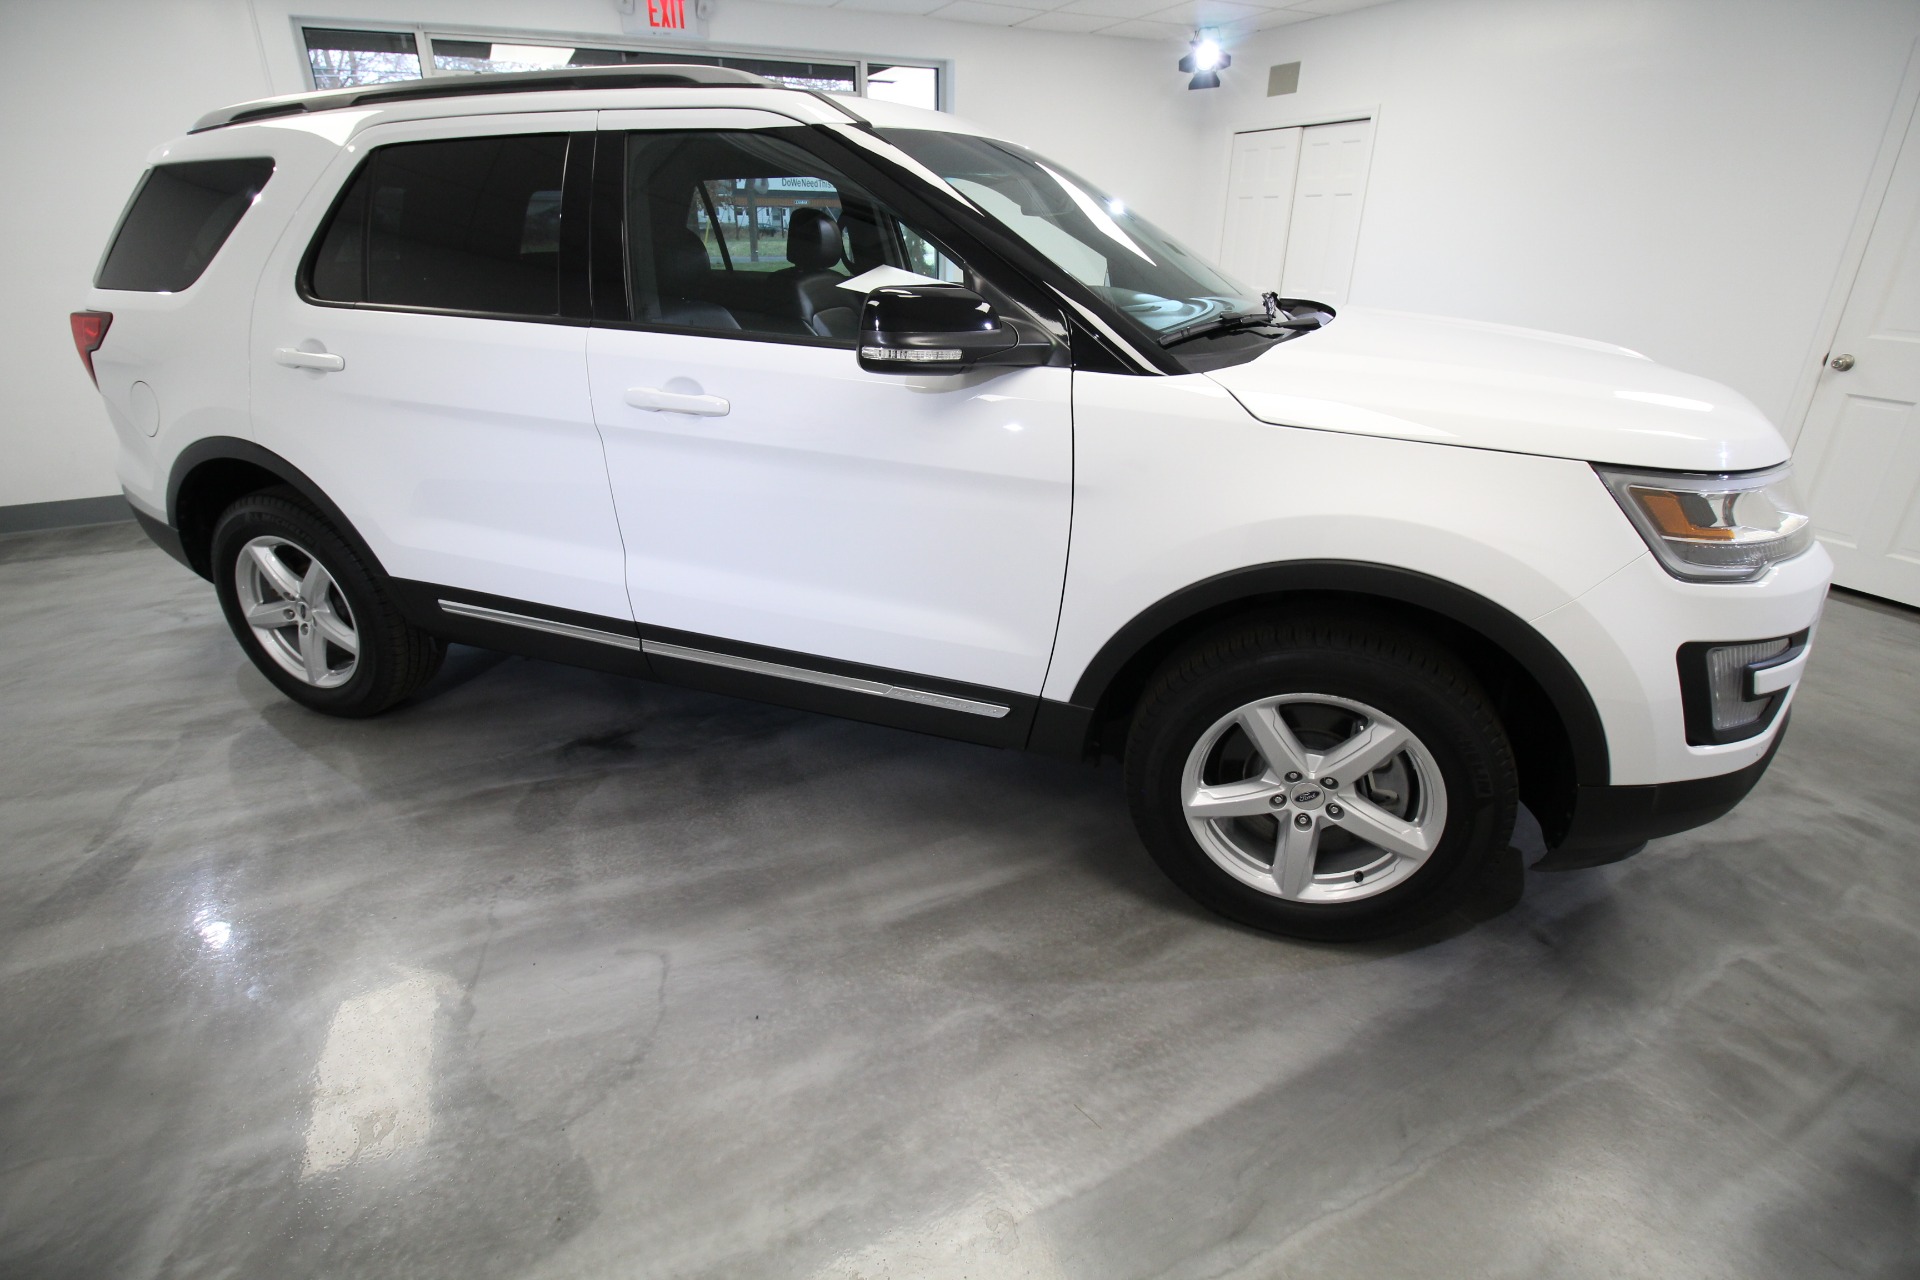 Used 2017 Ford Explorer XLT 4WD LOADED LOCAL CAR LIKE NEW LOW MILES 1 OWNER | Albany, NY